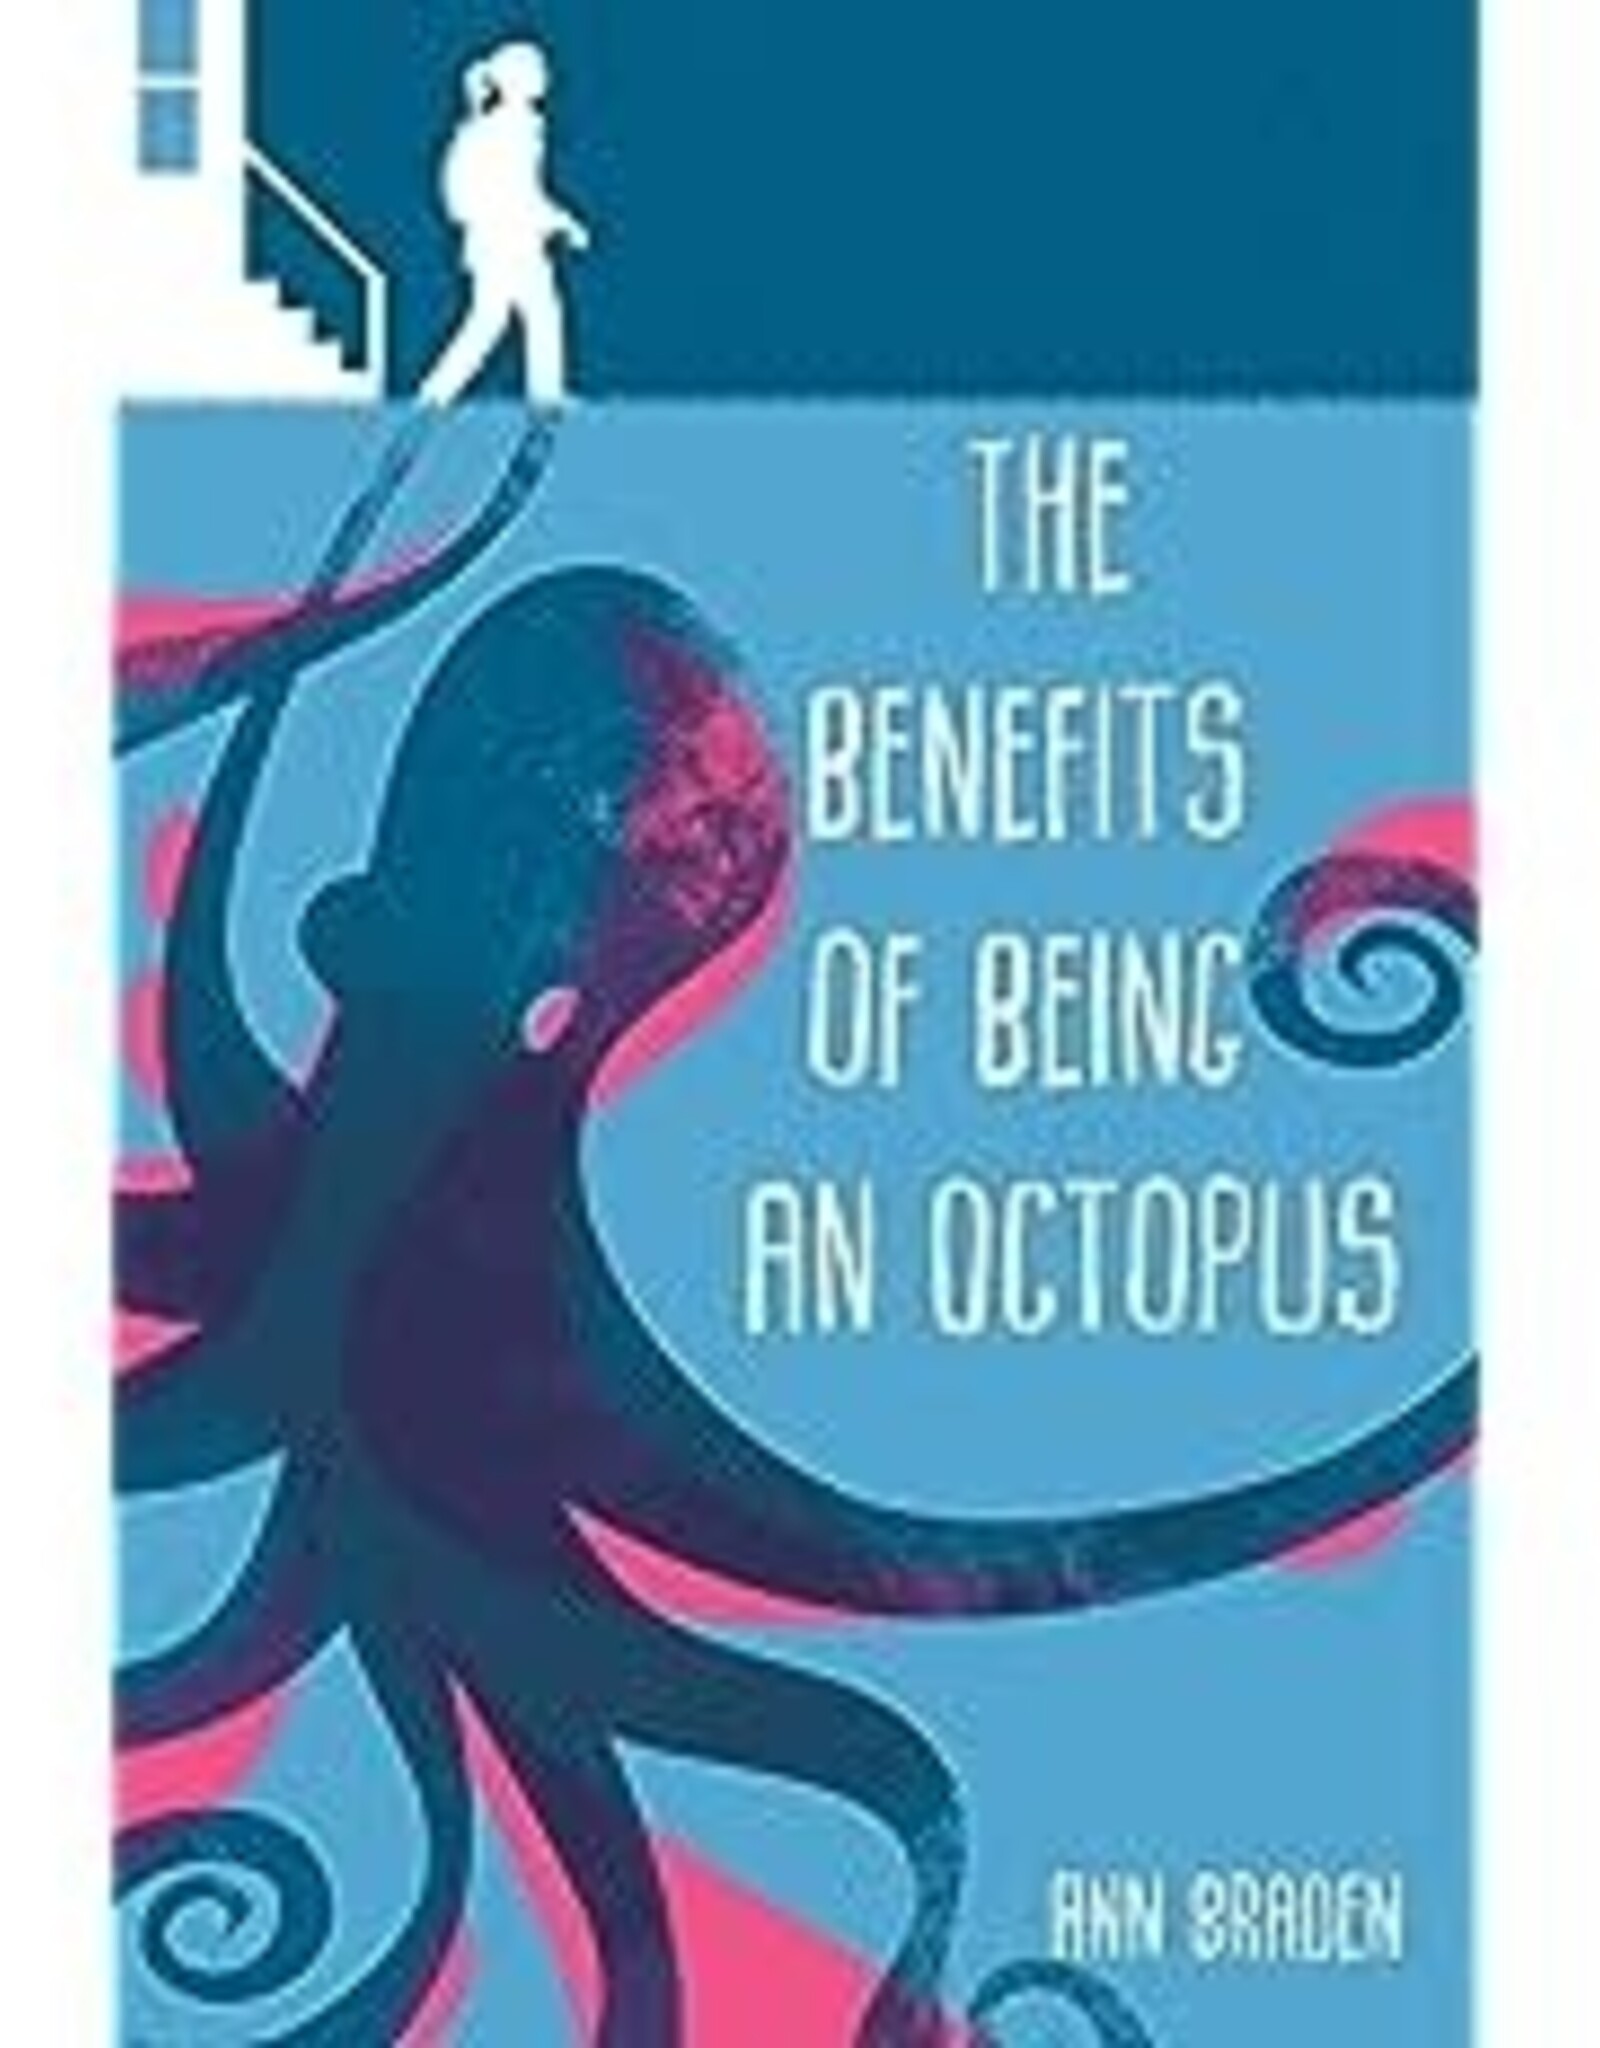 Simon and Schuster OBOB The Benefits of Being An Octopus